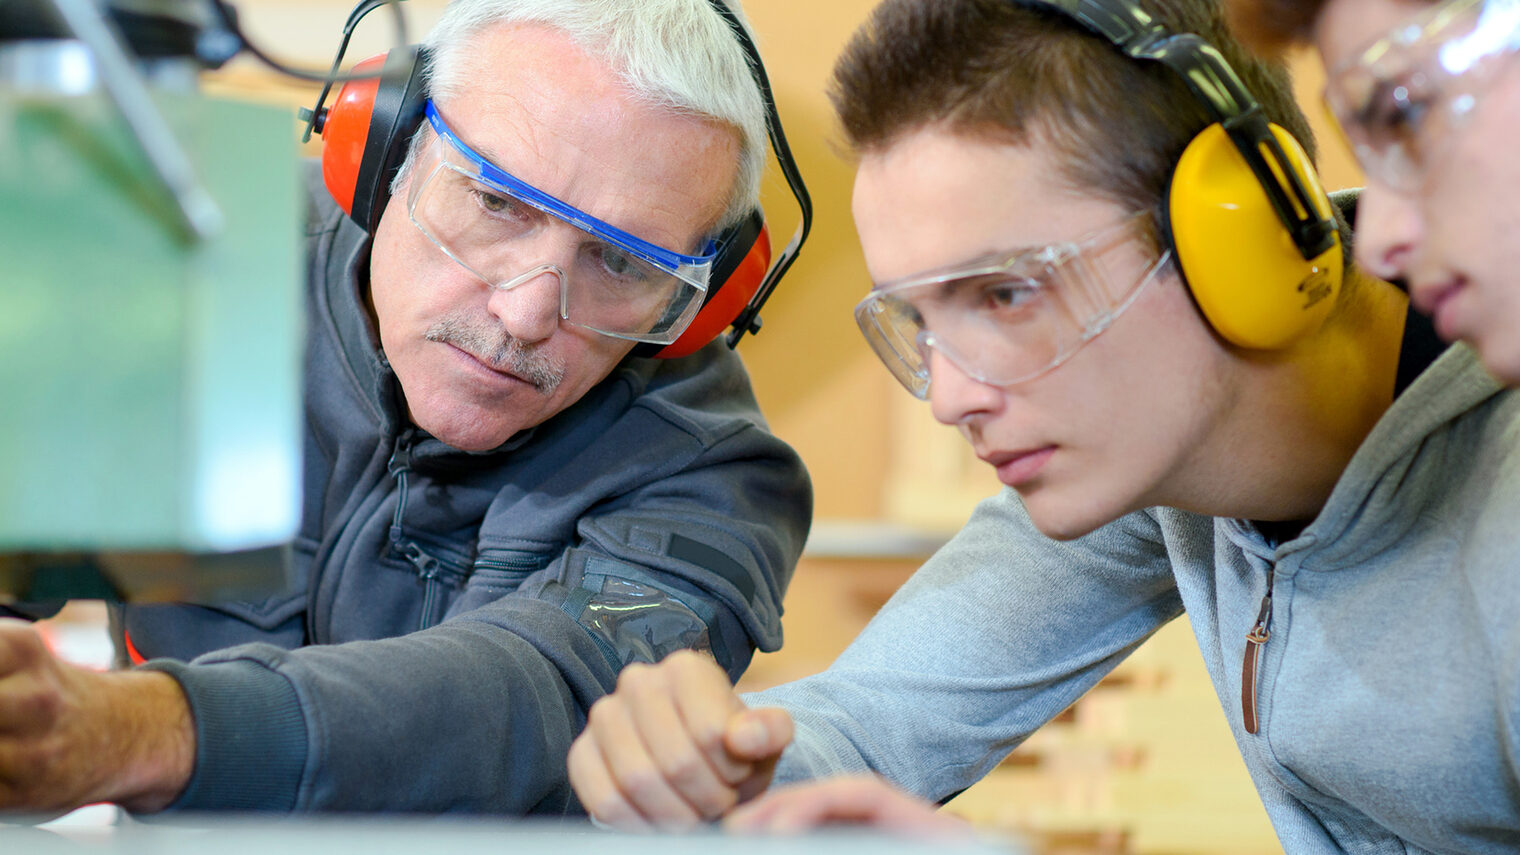 Woodwork apprenticeship Schlagwort(e): _#C_10706, _#M_Phomar_Hugo, _#M_Phomar_Leo, _#M_Phosou_Jean, apprentice, apprenticeship, building, carpenter, carpentry, construction, craft, craftsman, cutting, factory, gloves, goggles, headphones, indoors, industrial, industry, intern, laborer, machine, man, manual, occupation, persons, plank, production, professional, profile, protection, senior, standing, teach, training, view, wood, wood apprentice, work, worker, workshop, apprentice, apprenticeship, building, carpenter, carpentry, construction, craft, craftsman, cutting, factory, gloves, goggles, headphones, indoors, industrial, industry, intern, laborer, machine, man, manual, occupation, persons, plank, production, professional, profile, protection, senior, standing, teach, training, view, wood, wood apprentice, work, worker, workshop